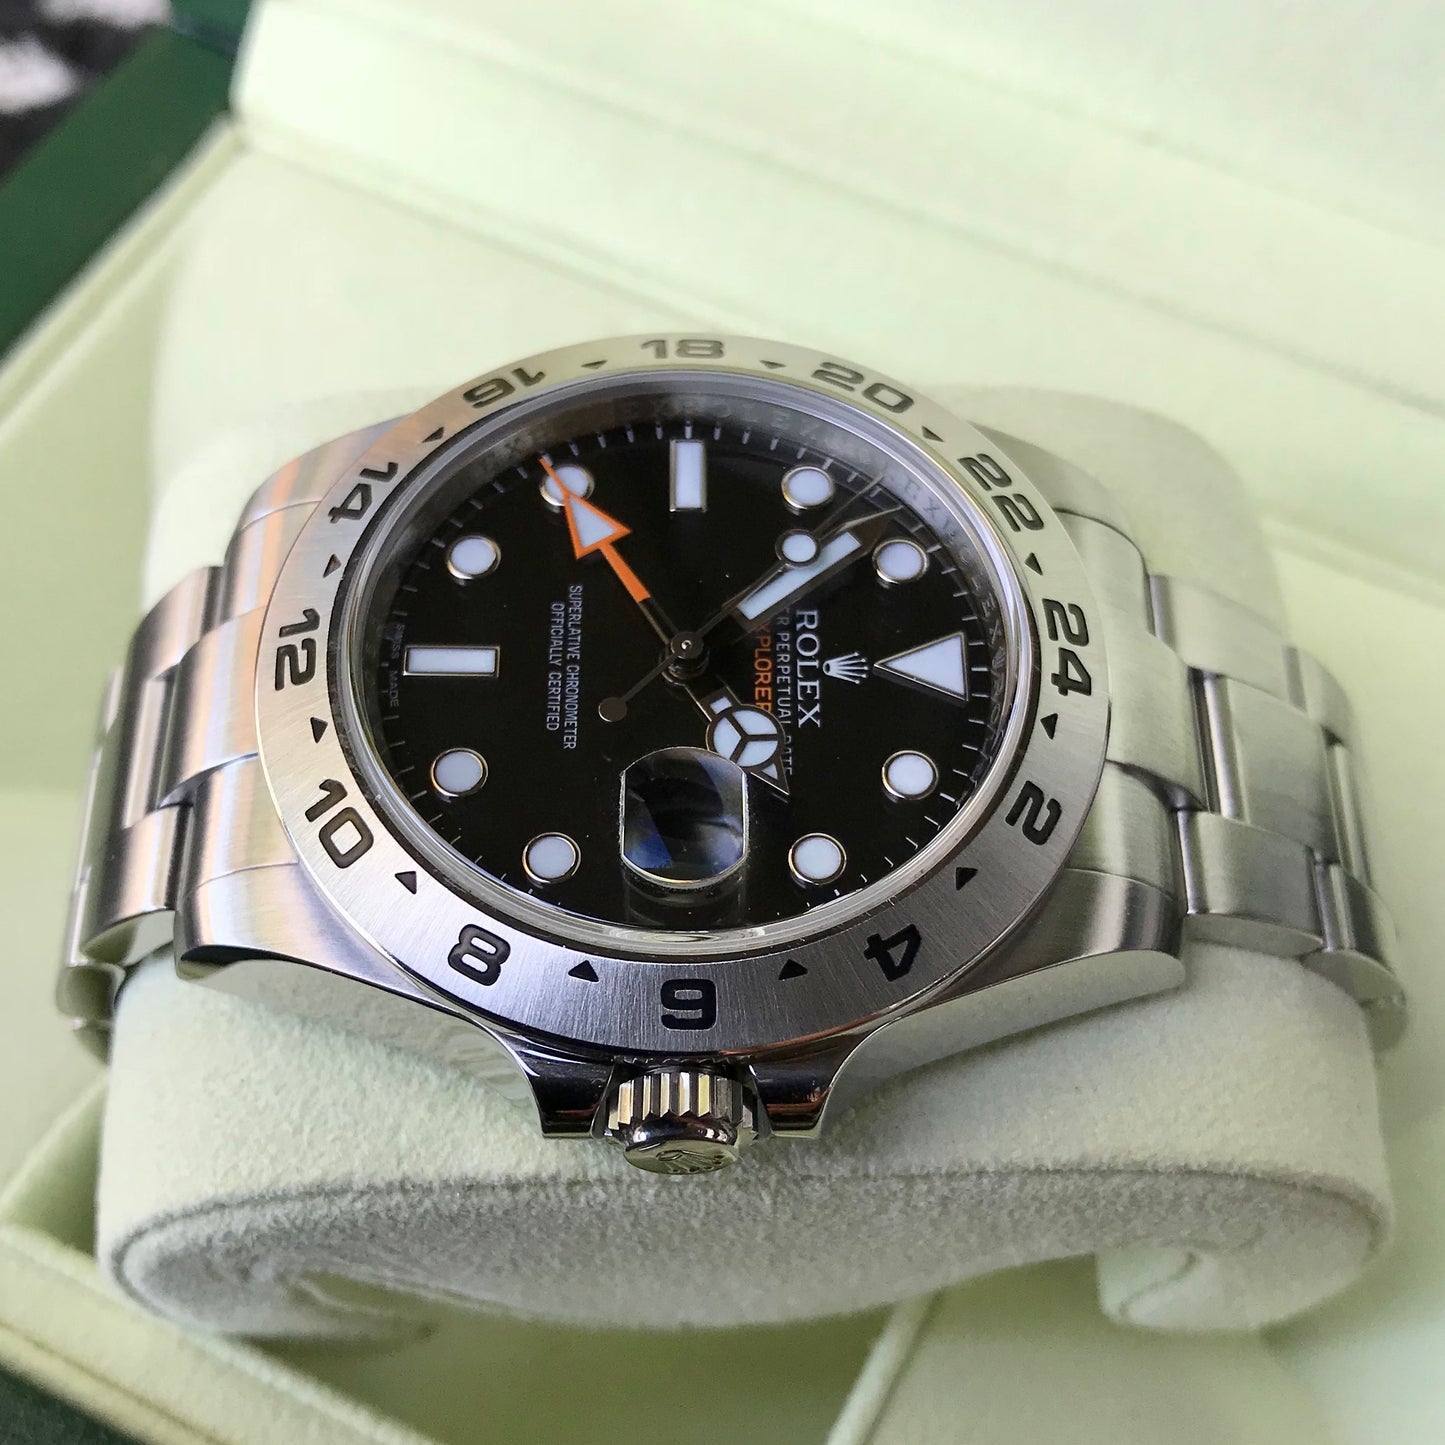 Rolex Explorer II 216570 Black GMT Oyster Perpetual Stainless Steel Wristwatch Box & Papers - Hashtag Watch Company